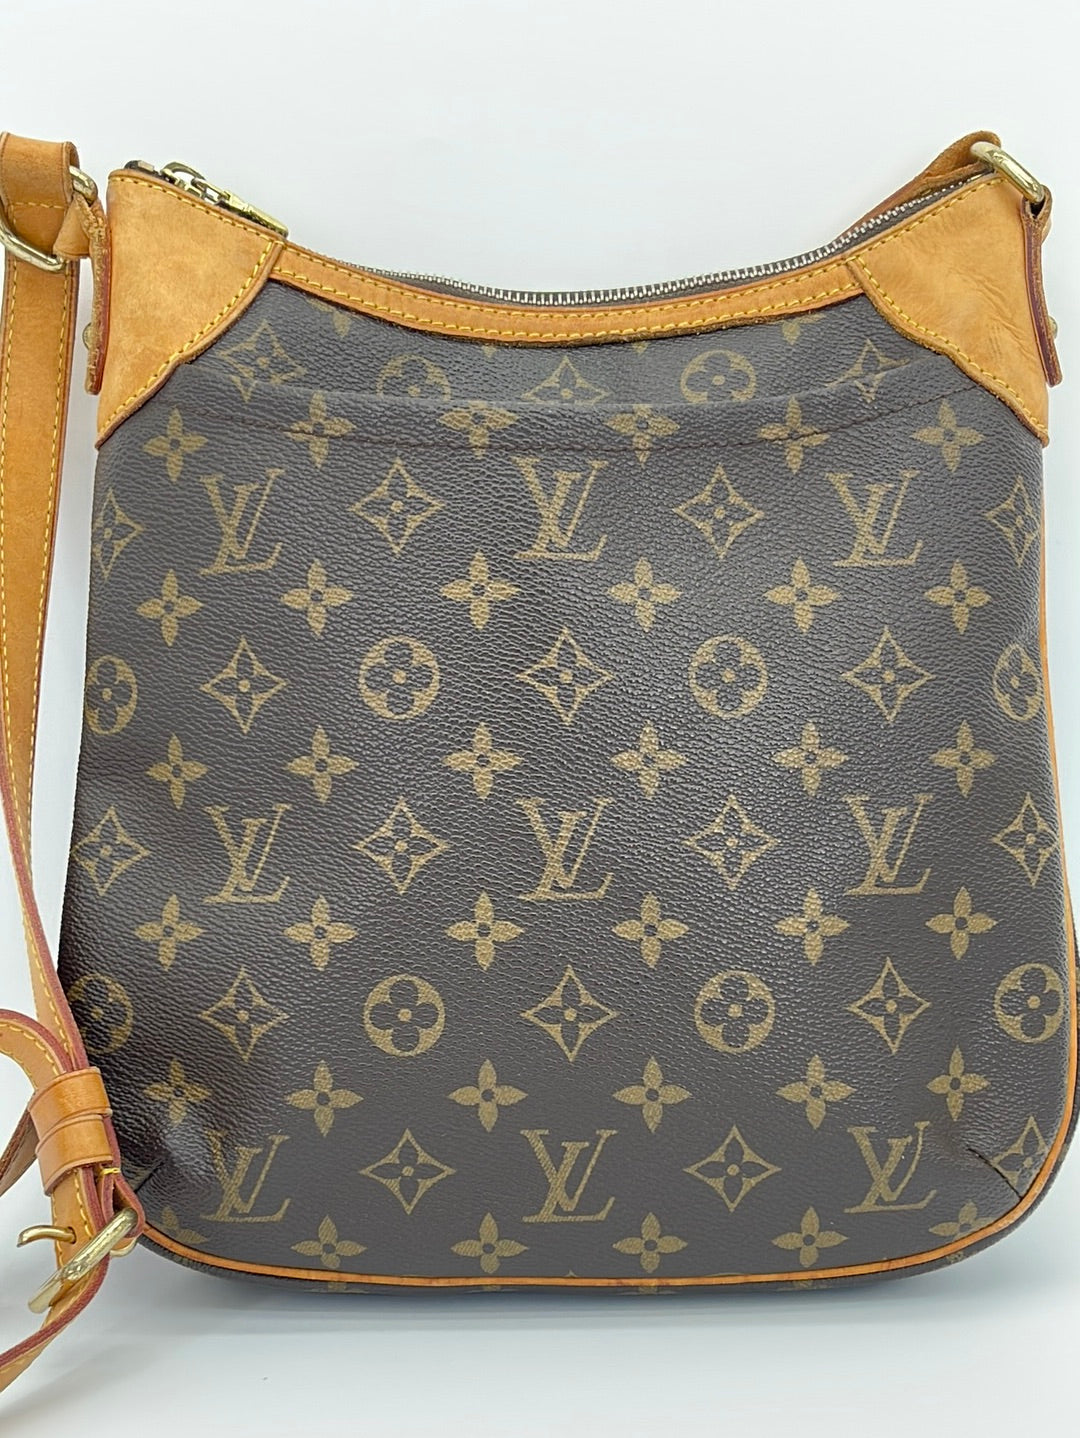 Buy Brand New & Pre-Owned Luxury LOUIS VUITTON ODEON PM M56390